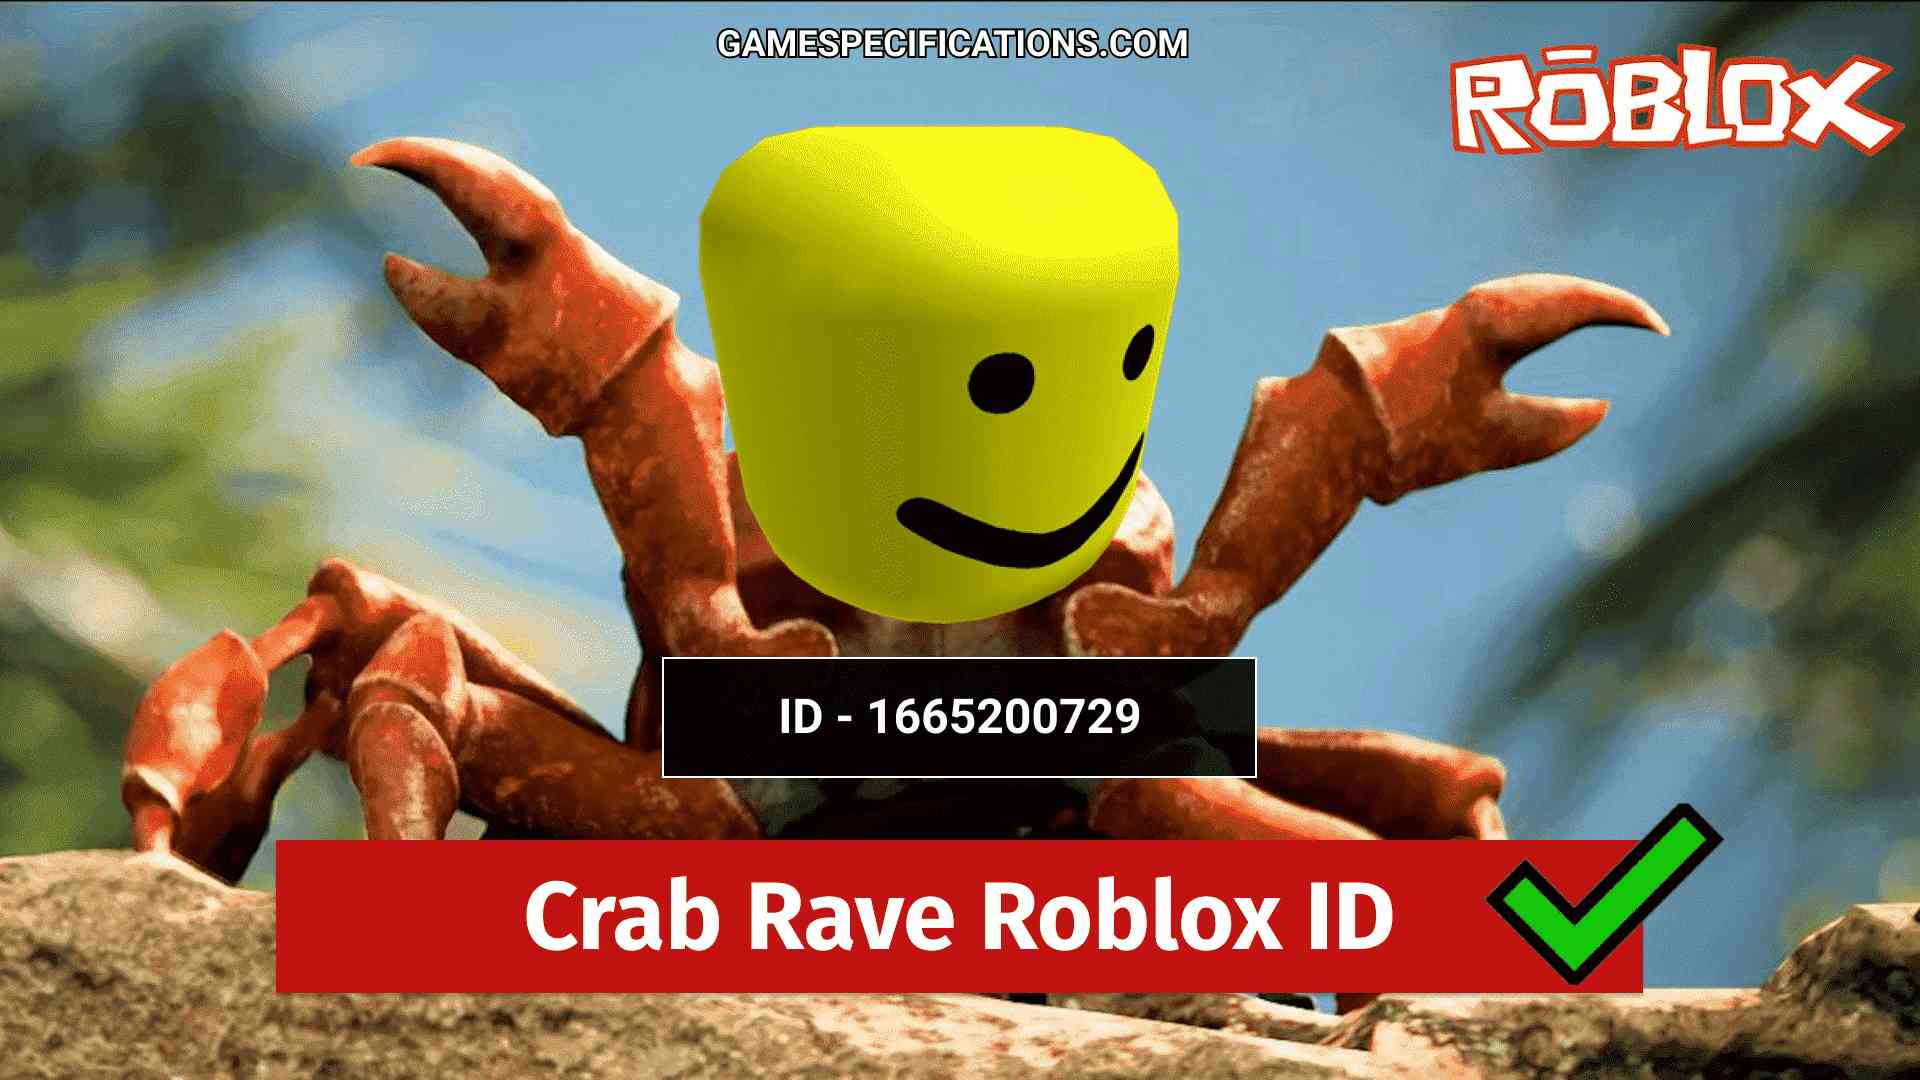 10 Best Crab Rave Roblox Id Codes Parody Remix Included Game Specifications - megalovina loud roblox id